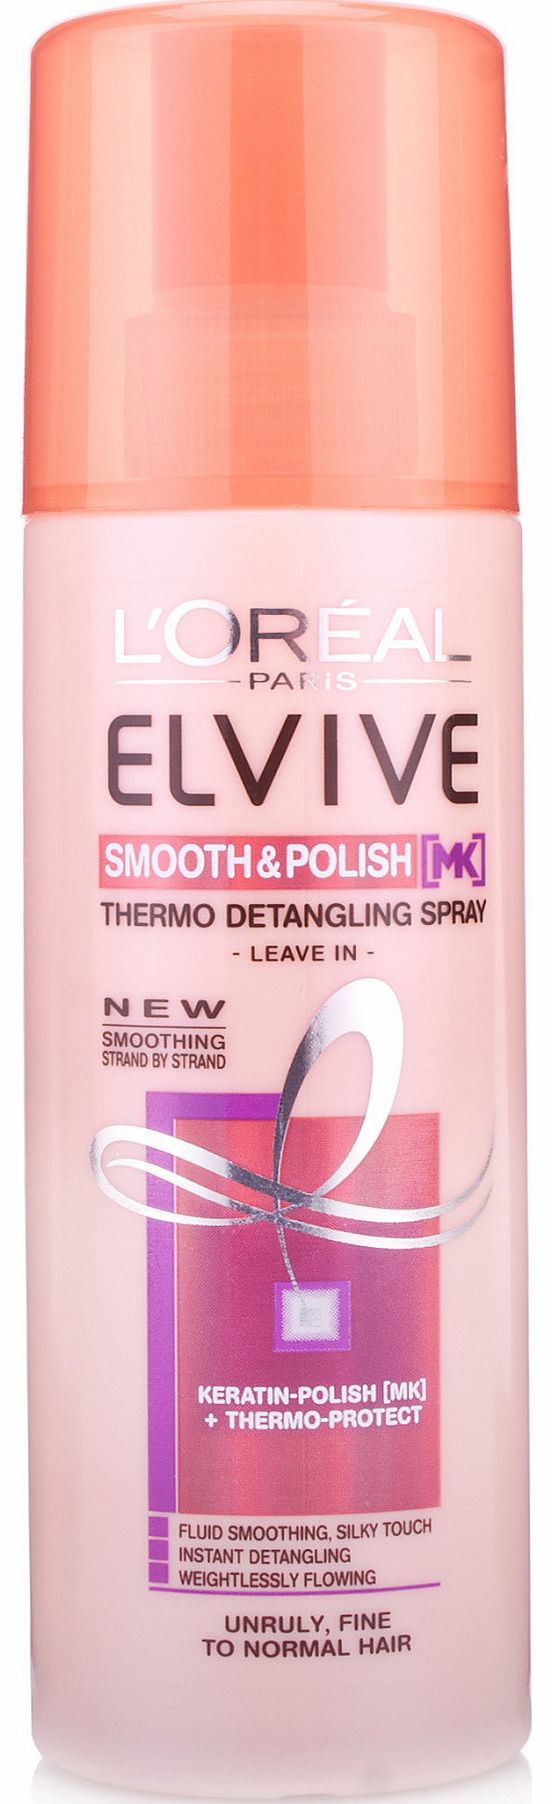 L'Oreal Elvive Smooth & Polish Leave-In